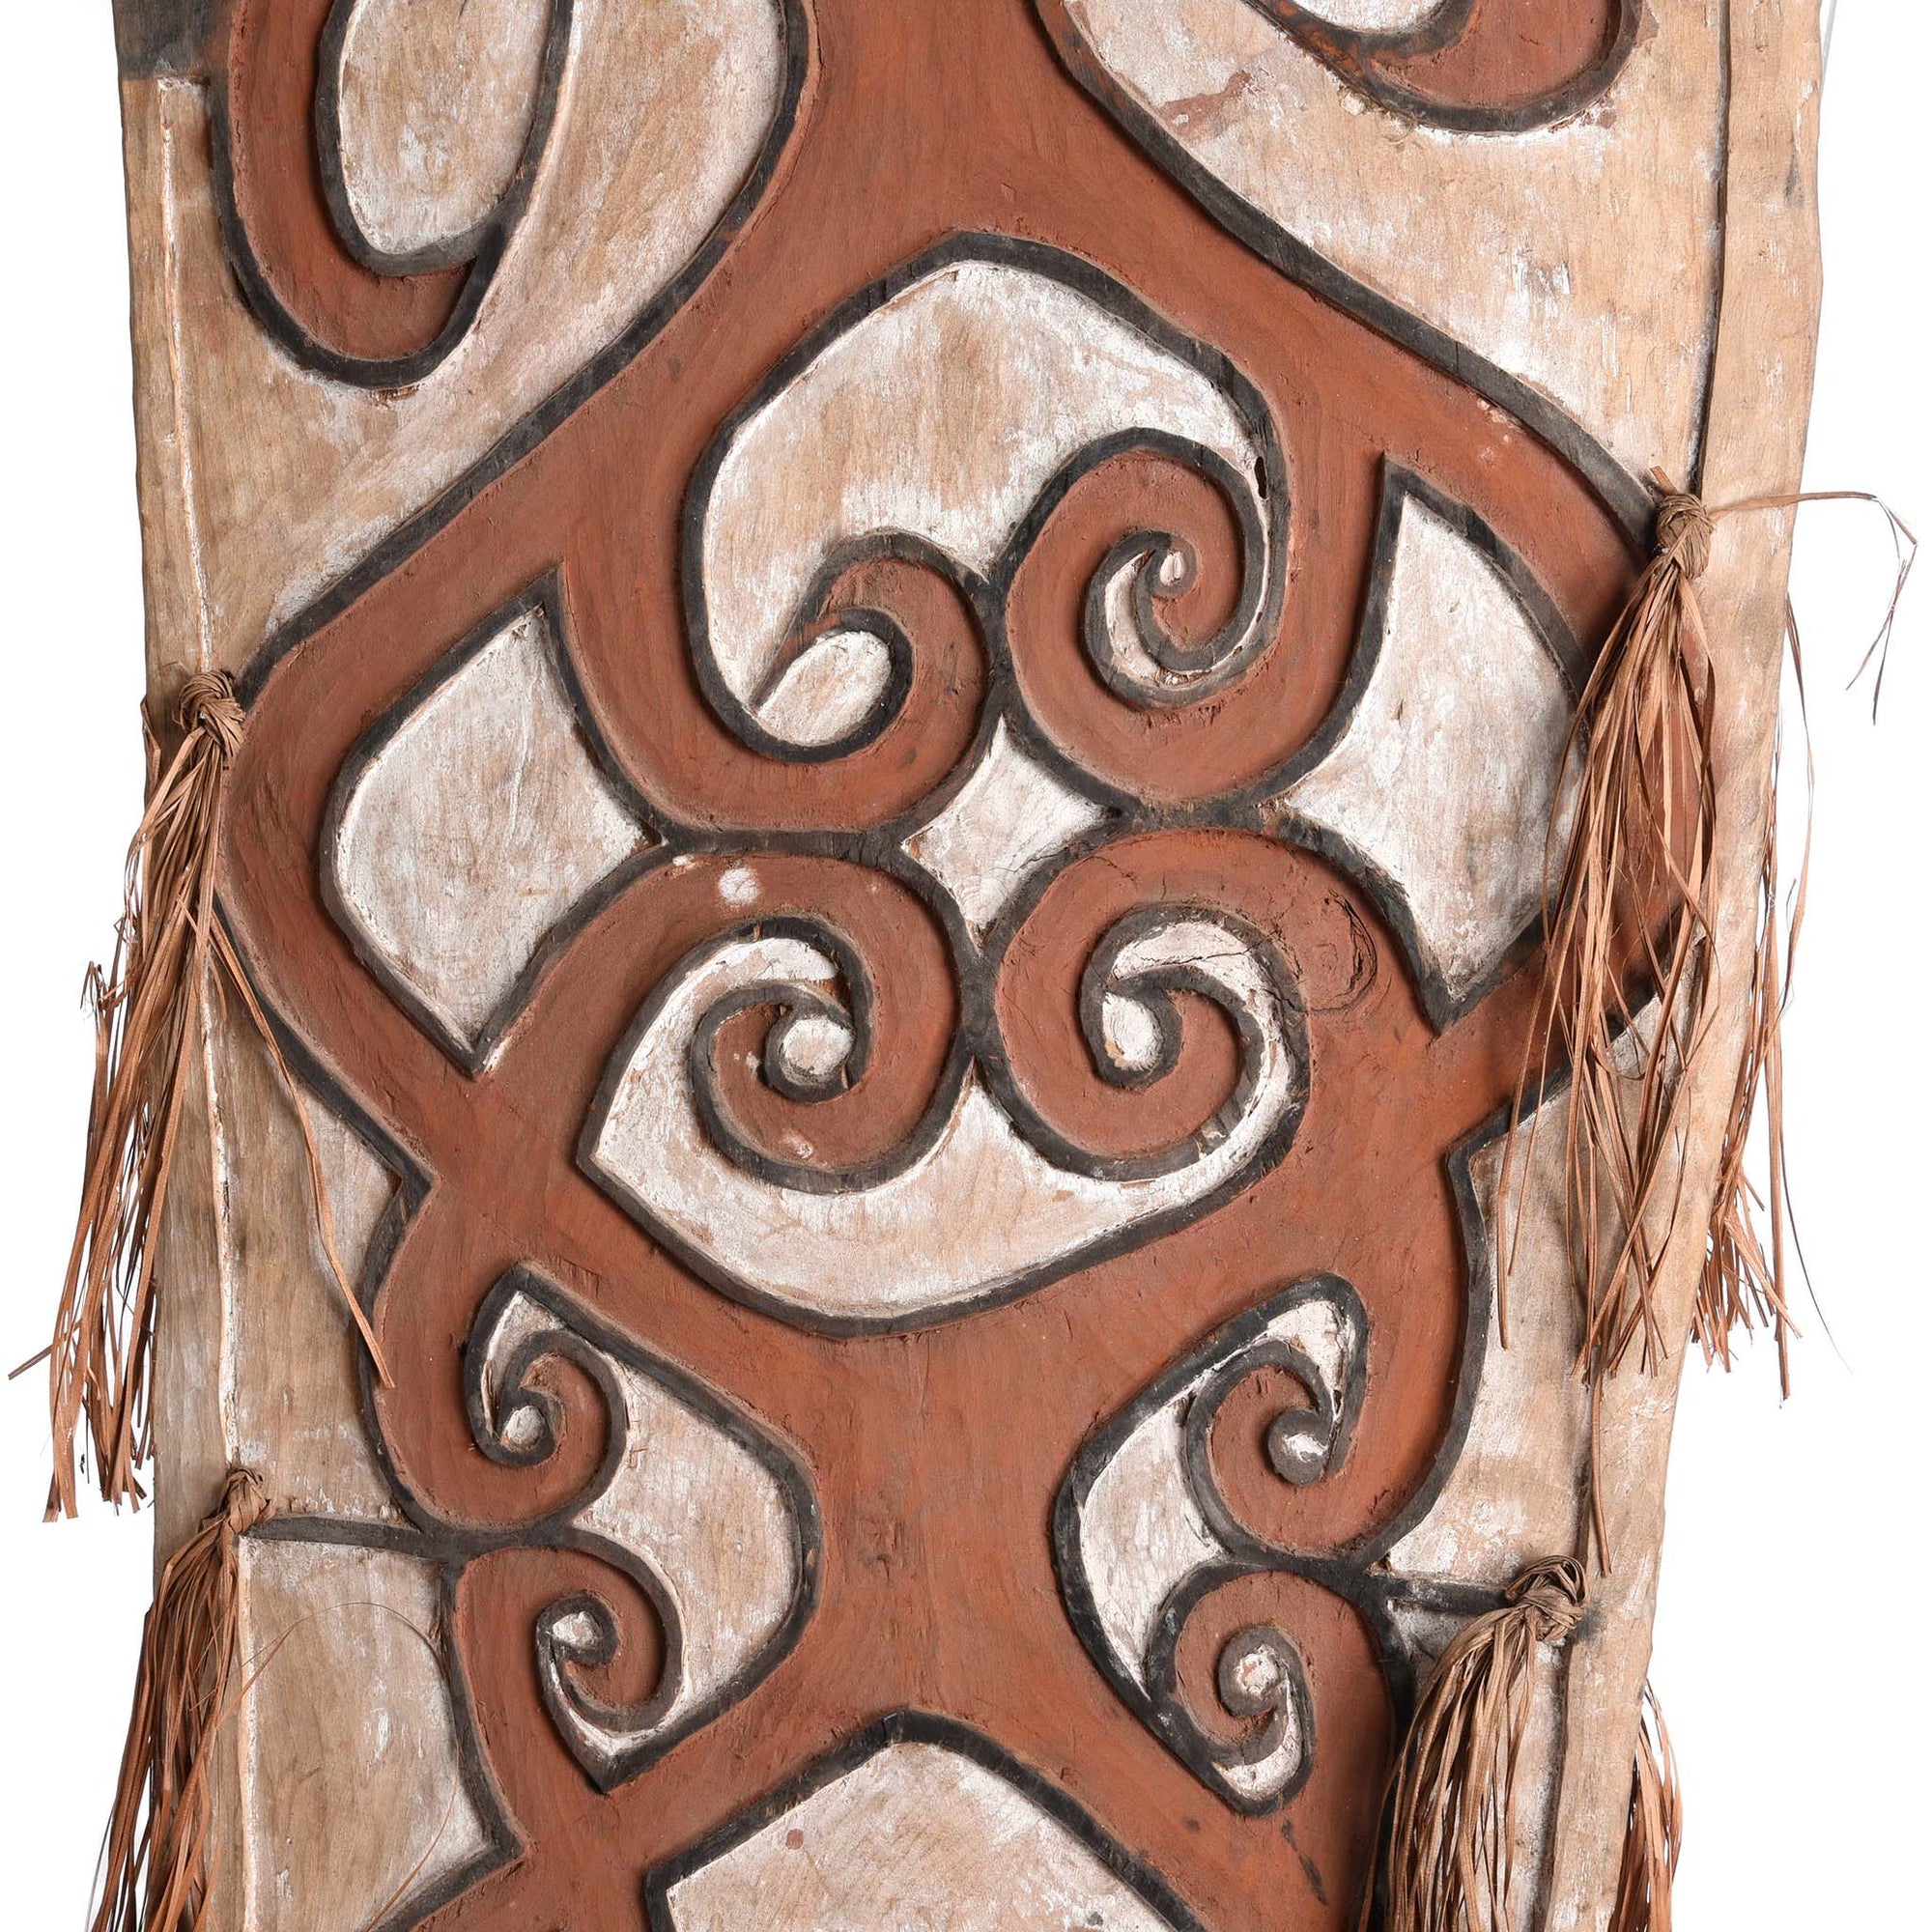 Asmat Ceremonial Shield from New Guinea - Ca 85 yrs old | Indigo Antiques